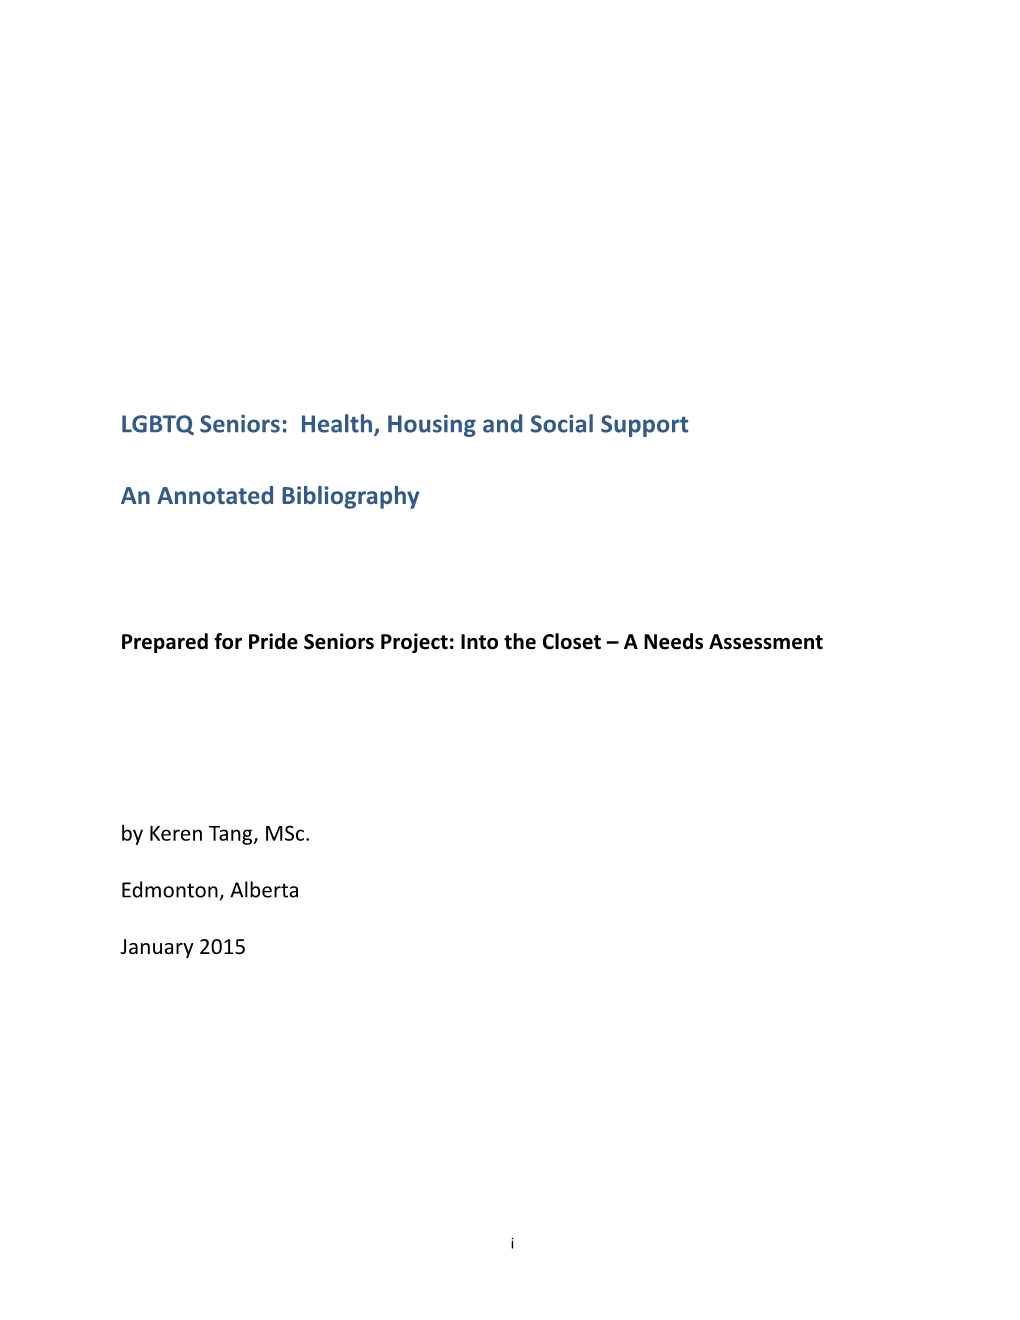 LGBTQ Seniors and Housing Annotated Bibliography